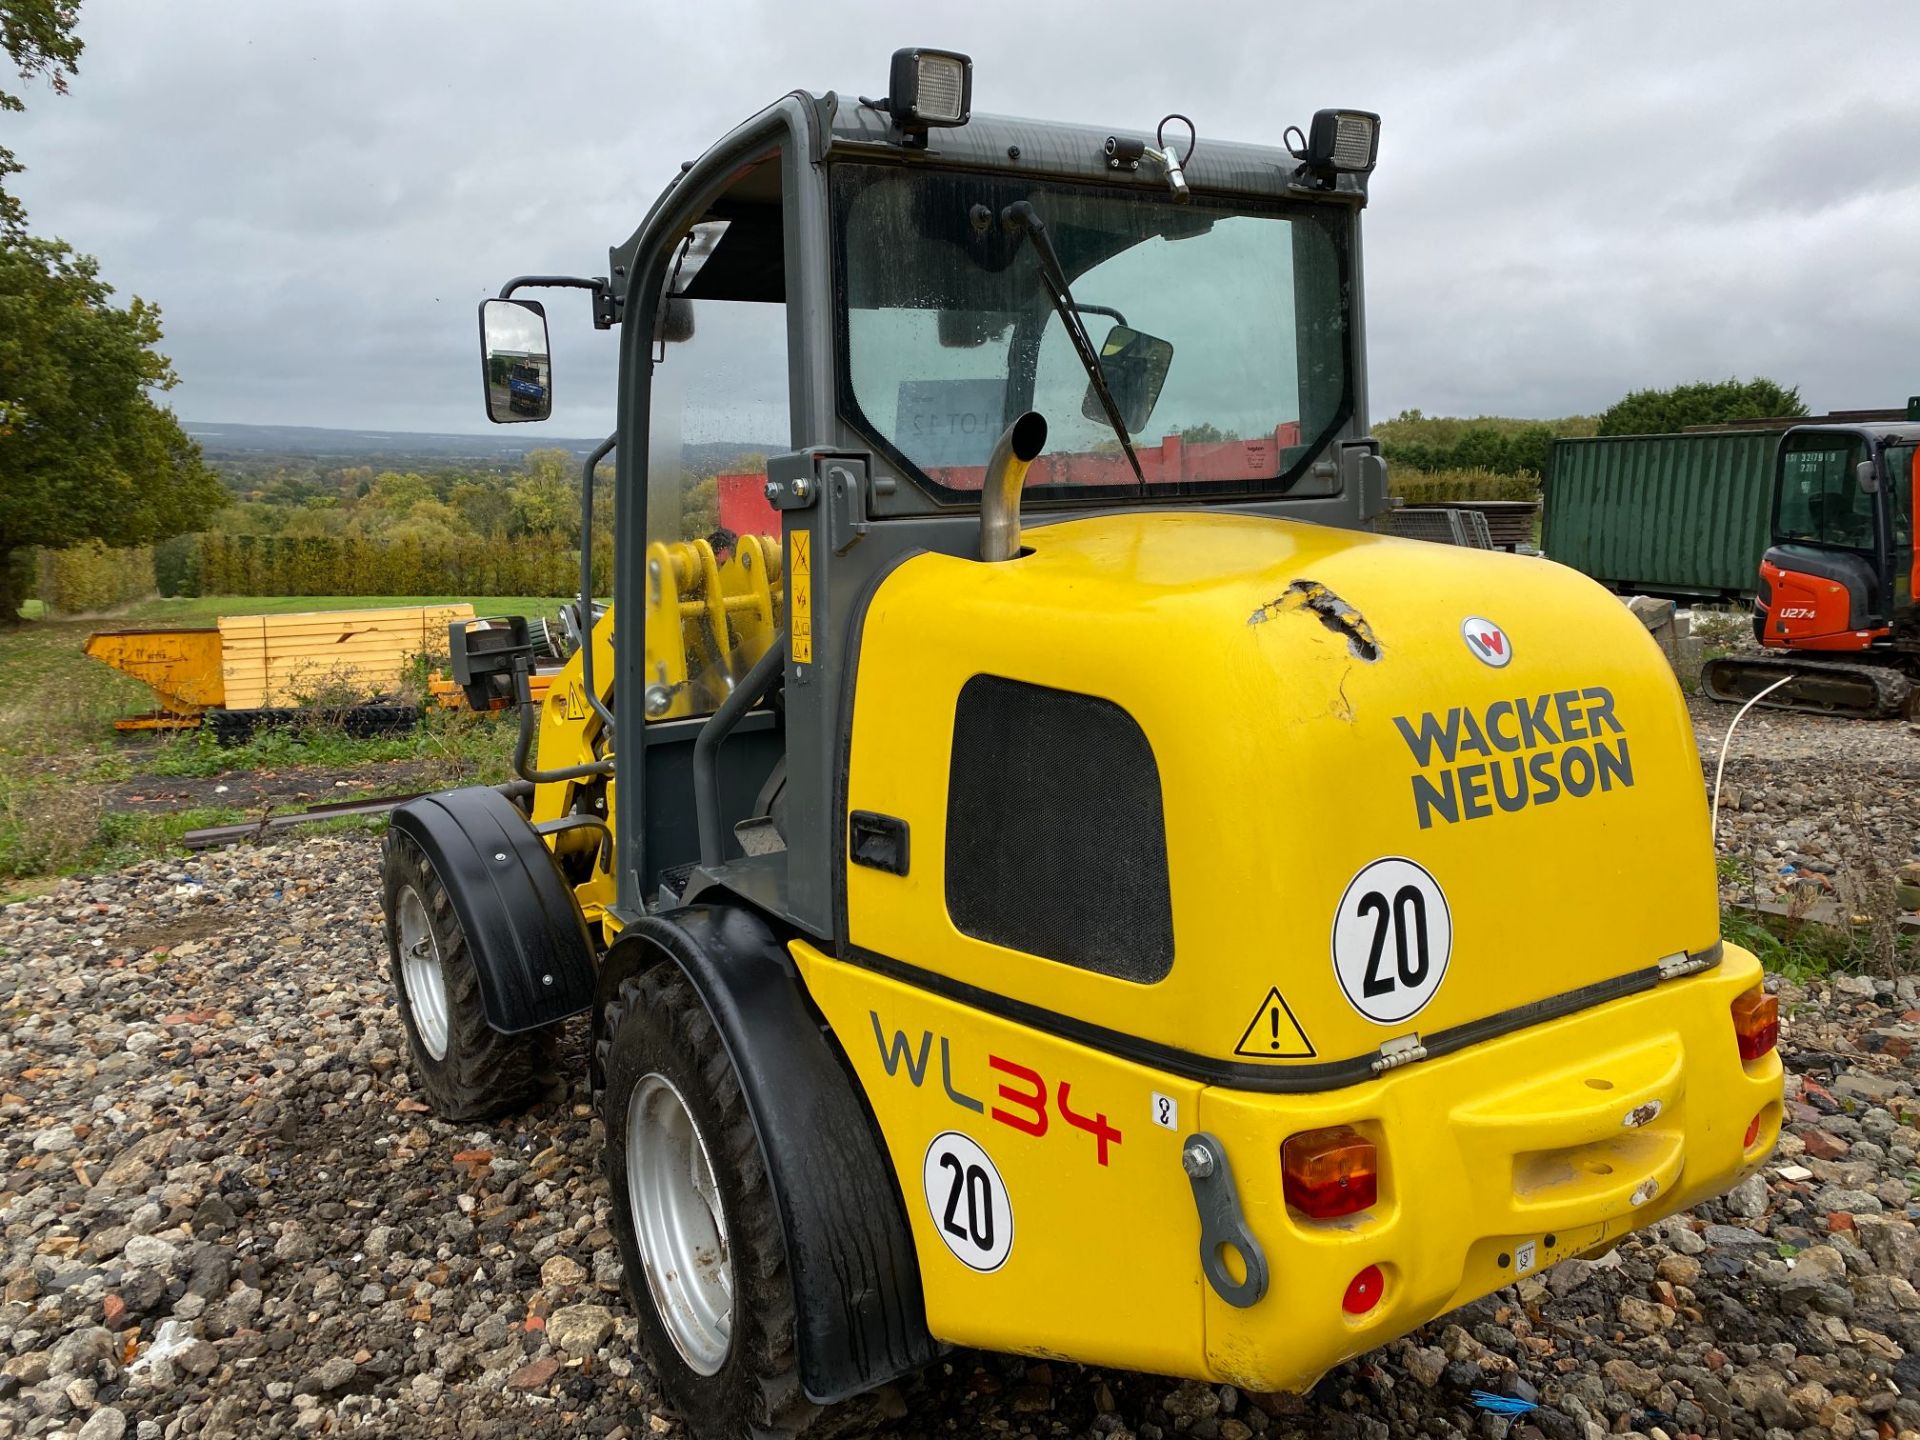 Wacker Neuson WL34 2070 CX articulated loading shovel, Serial No: 3029235 (2014) - 1062 hrs, with - Image 3 of 30